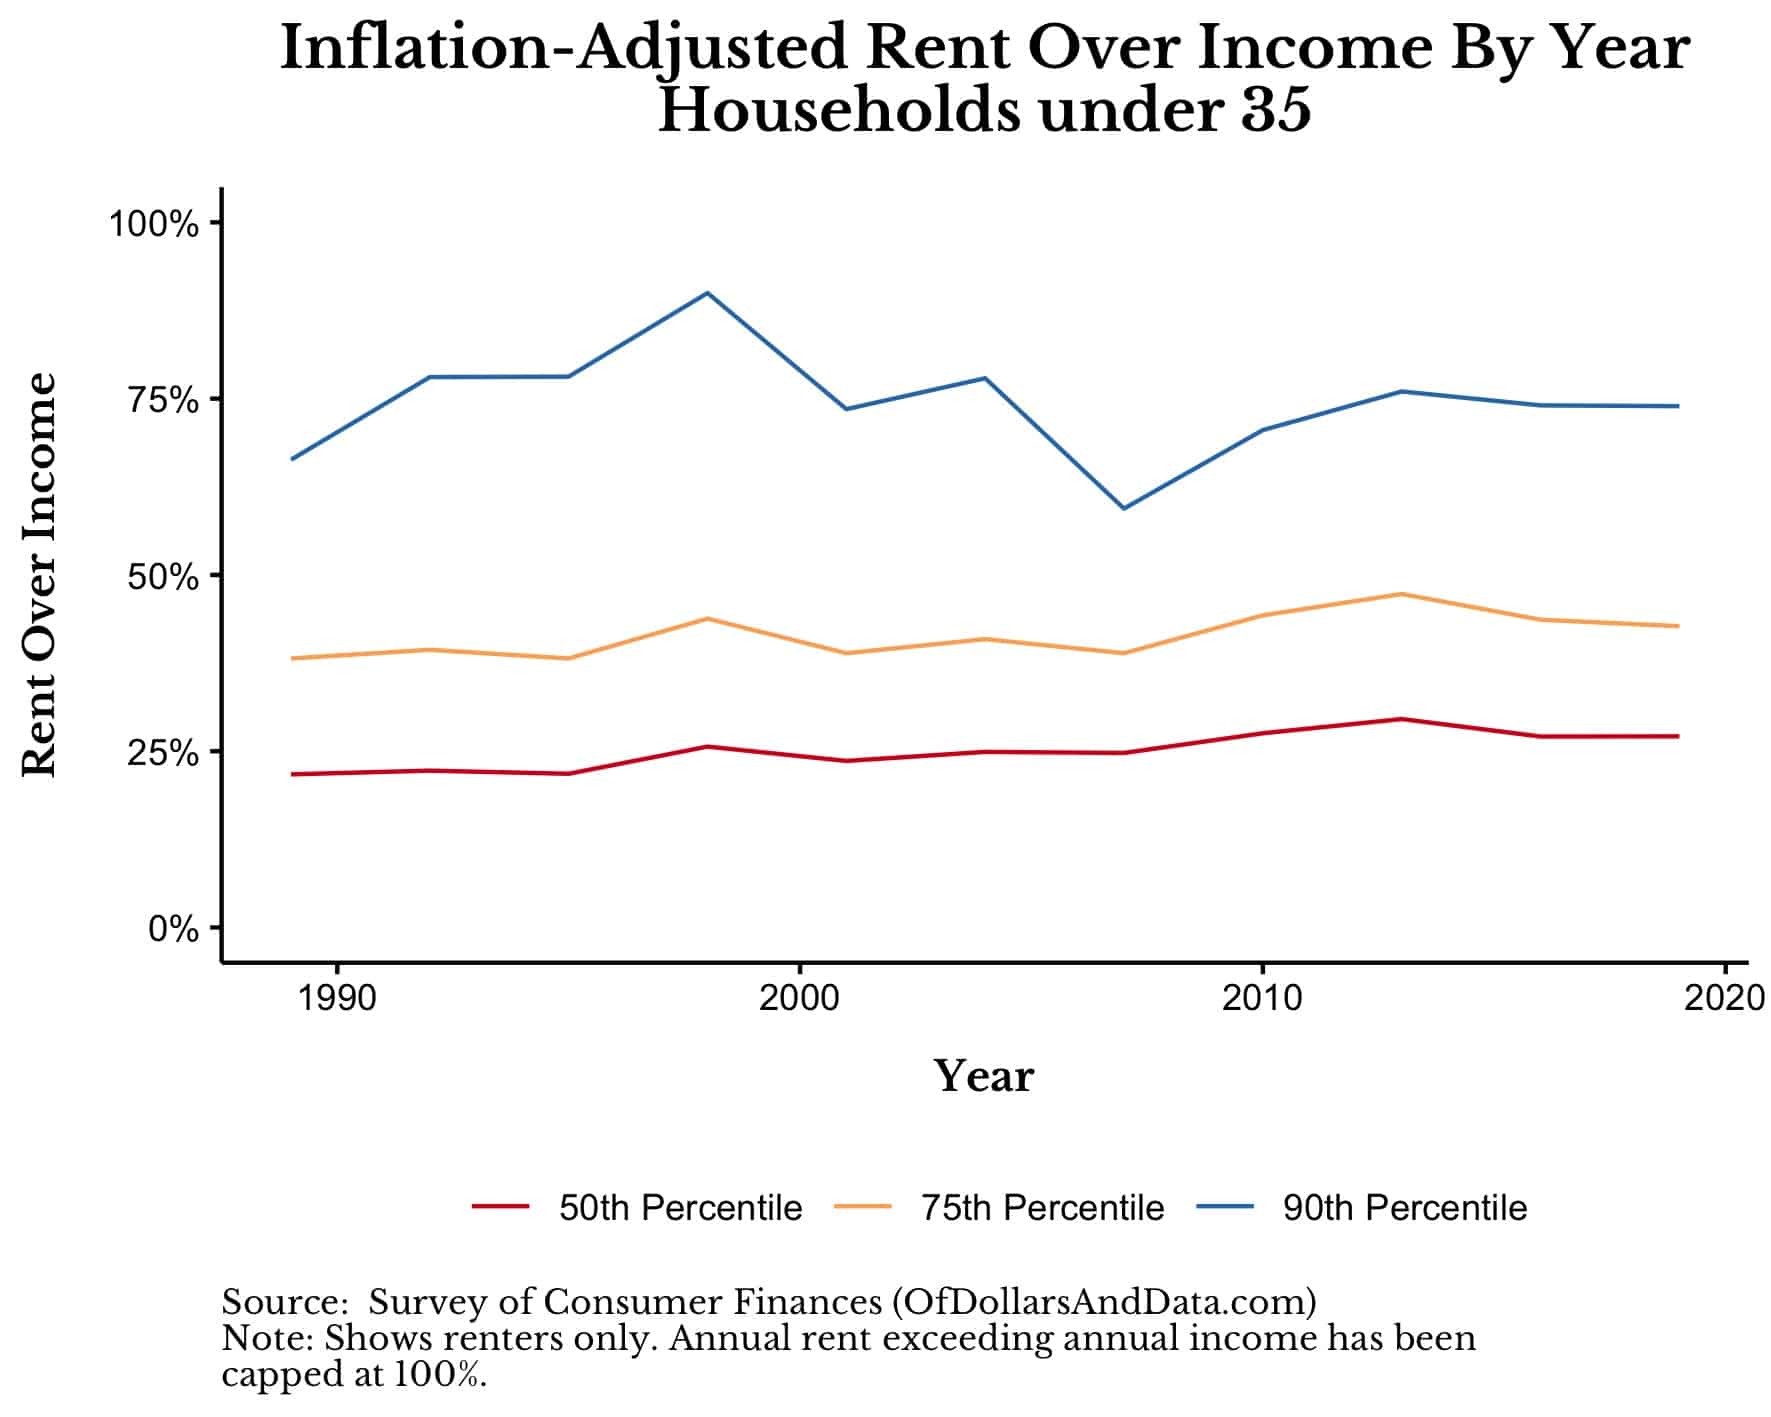 Inflation-adjusted rent by year for households under 35 for the 50th, 75th, and 90th percentiles